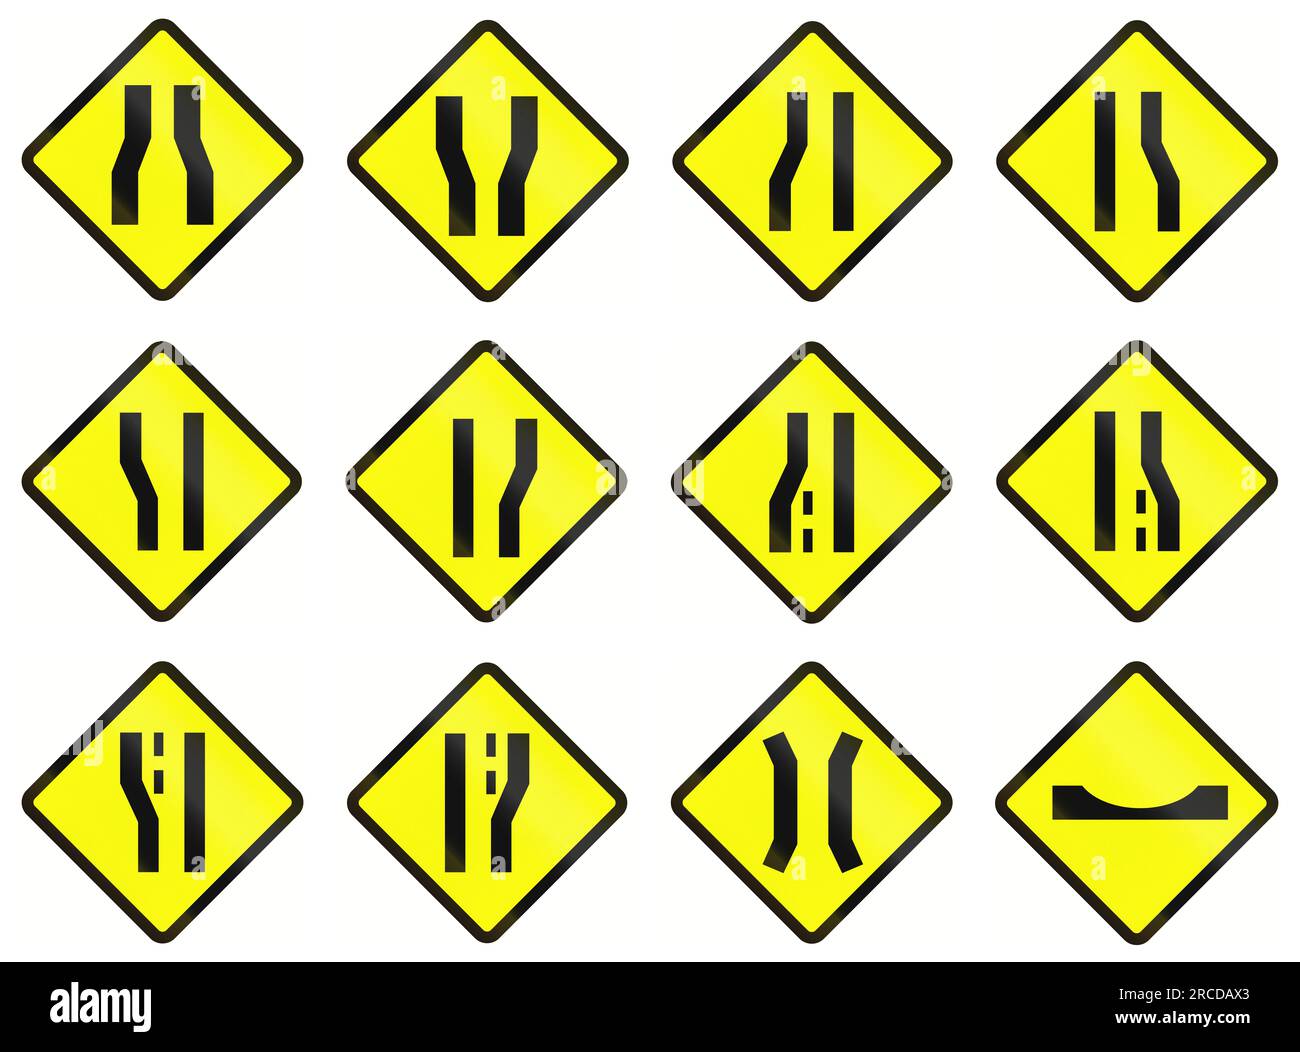 One Lane Road Ahead In Indonesia. Stock Photo